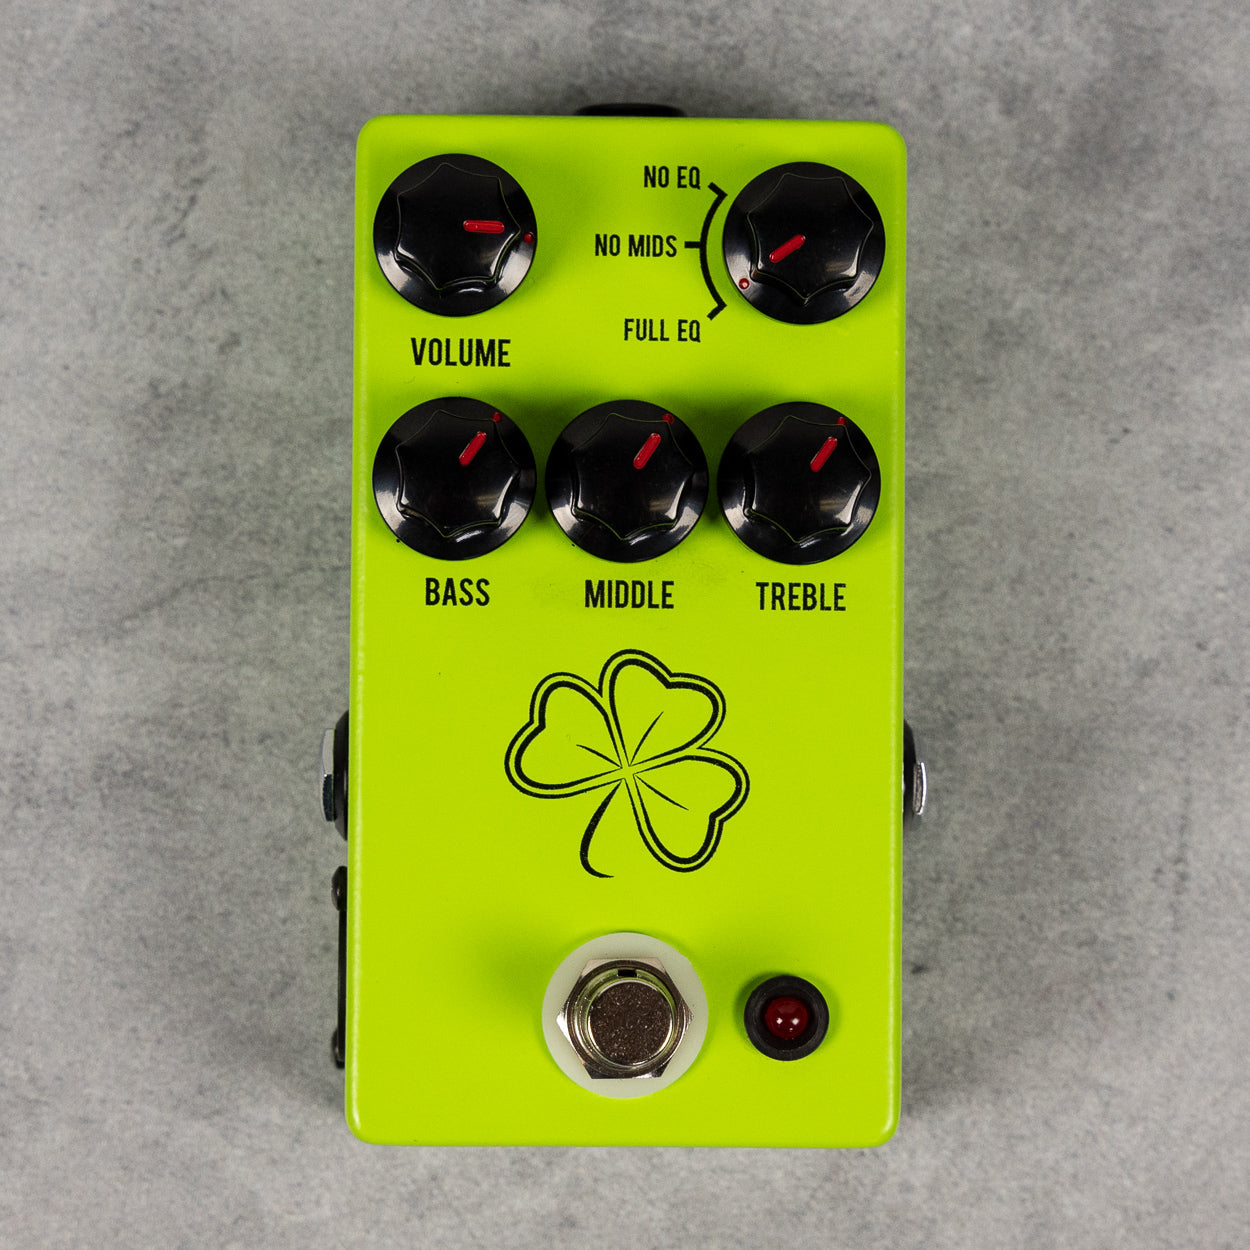 JHS The Clover Preamp/Boost Pedal